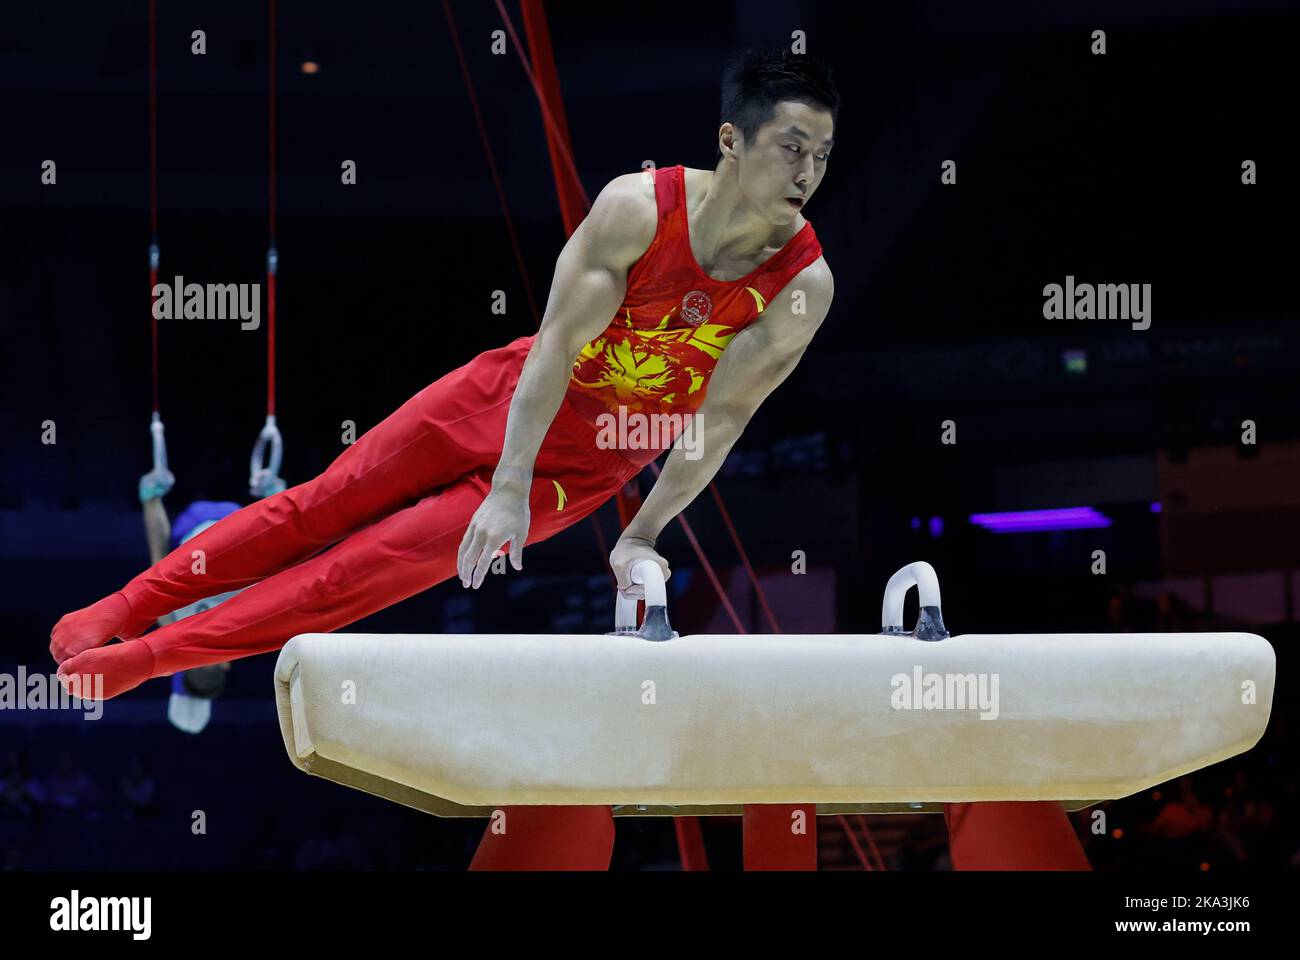 31st October 2022, M&amp;S Bank Arena, Liverpool, England; 2022 World Artistic Gymnastics Championships; Men's Qualification Pommel Horse - Hao You (CHN) Tokyo 2020 Olympic rings silver medallist Stock Photo